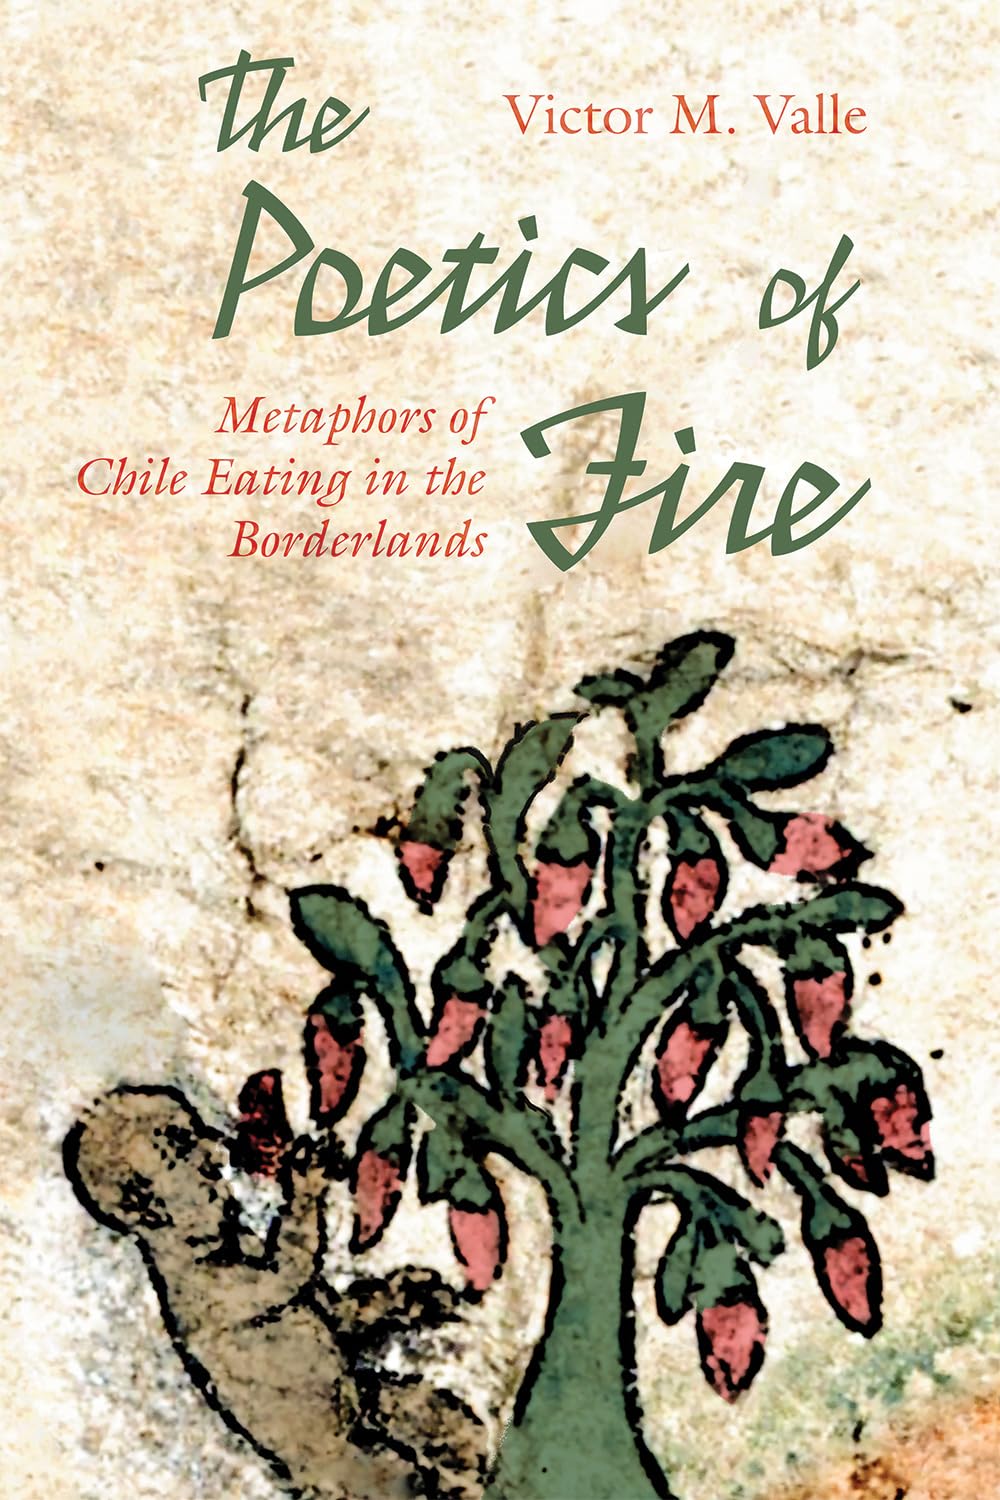 The Poetics of Fire: Metaphors of Chile Eating in the Borderlands (Querencias)